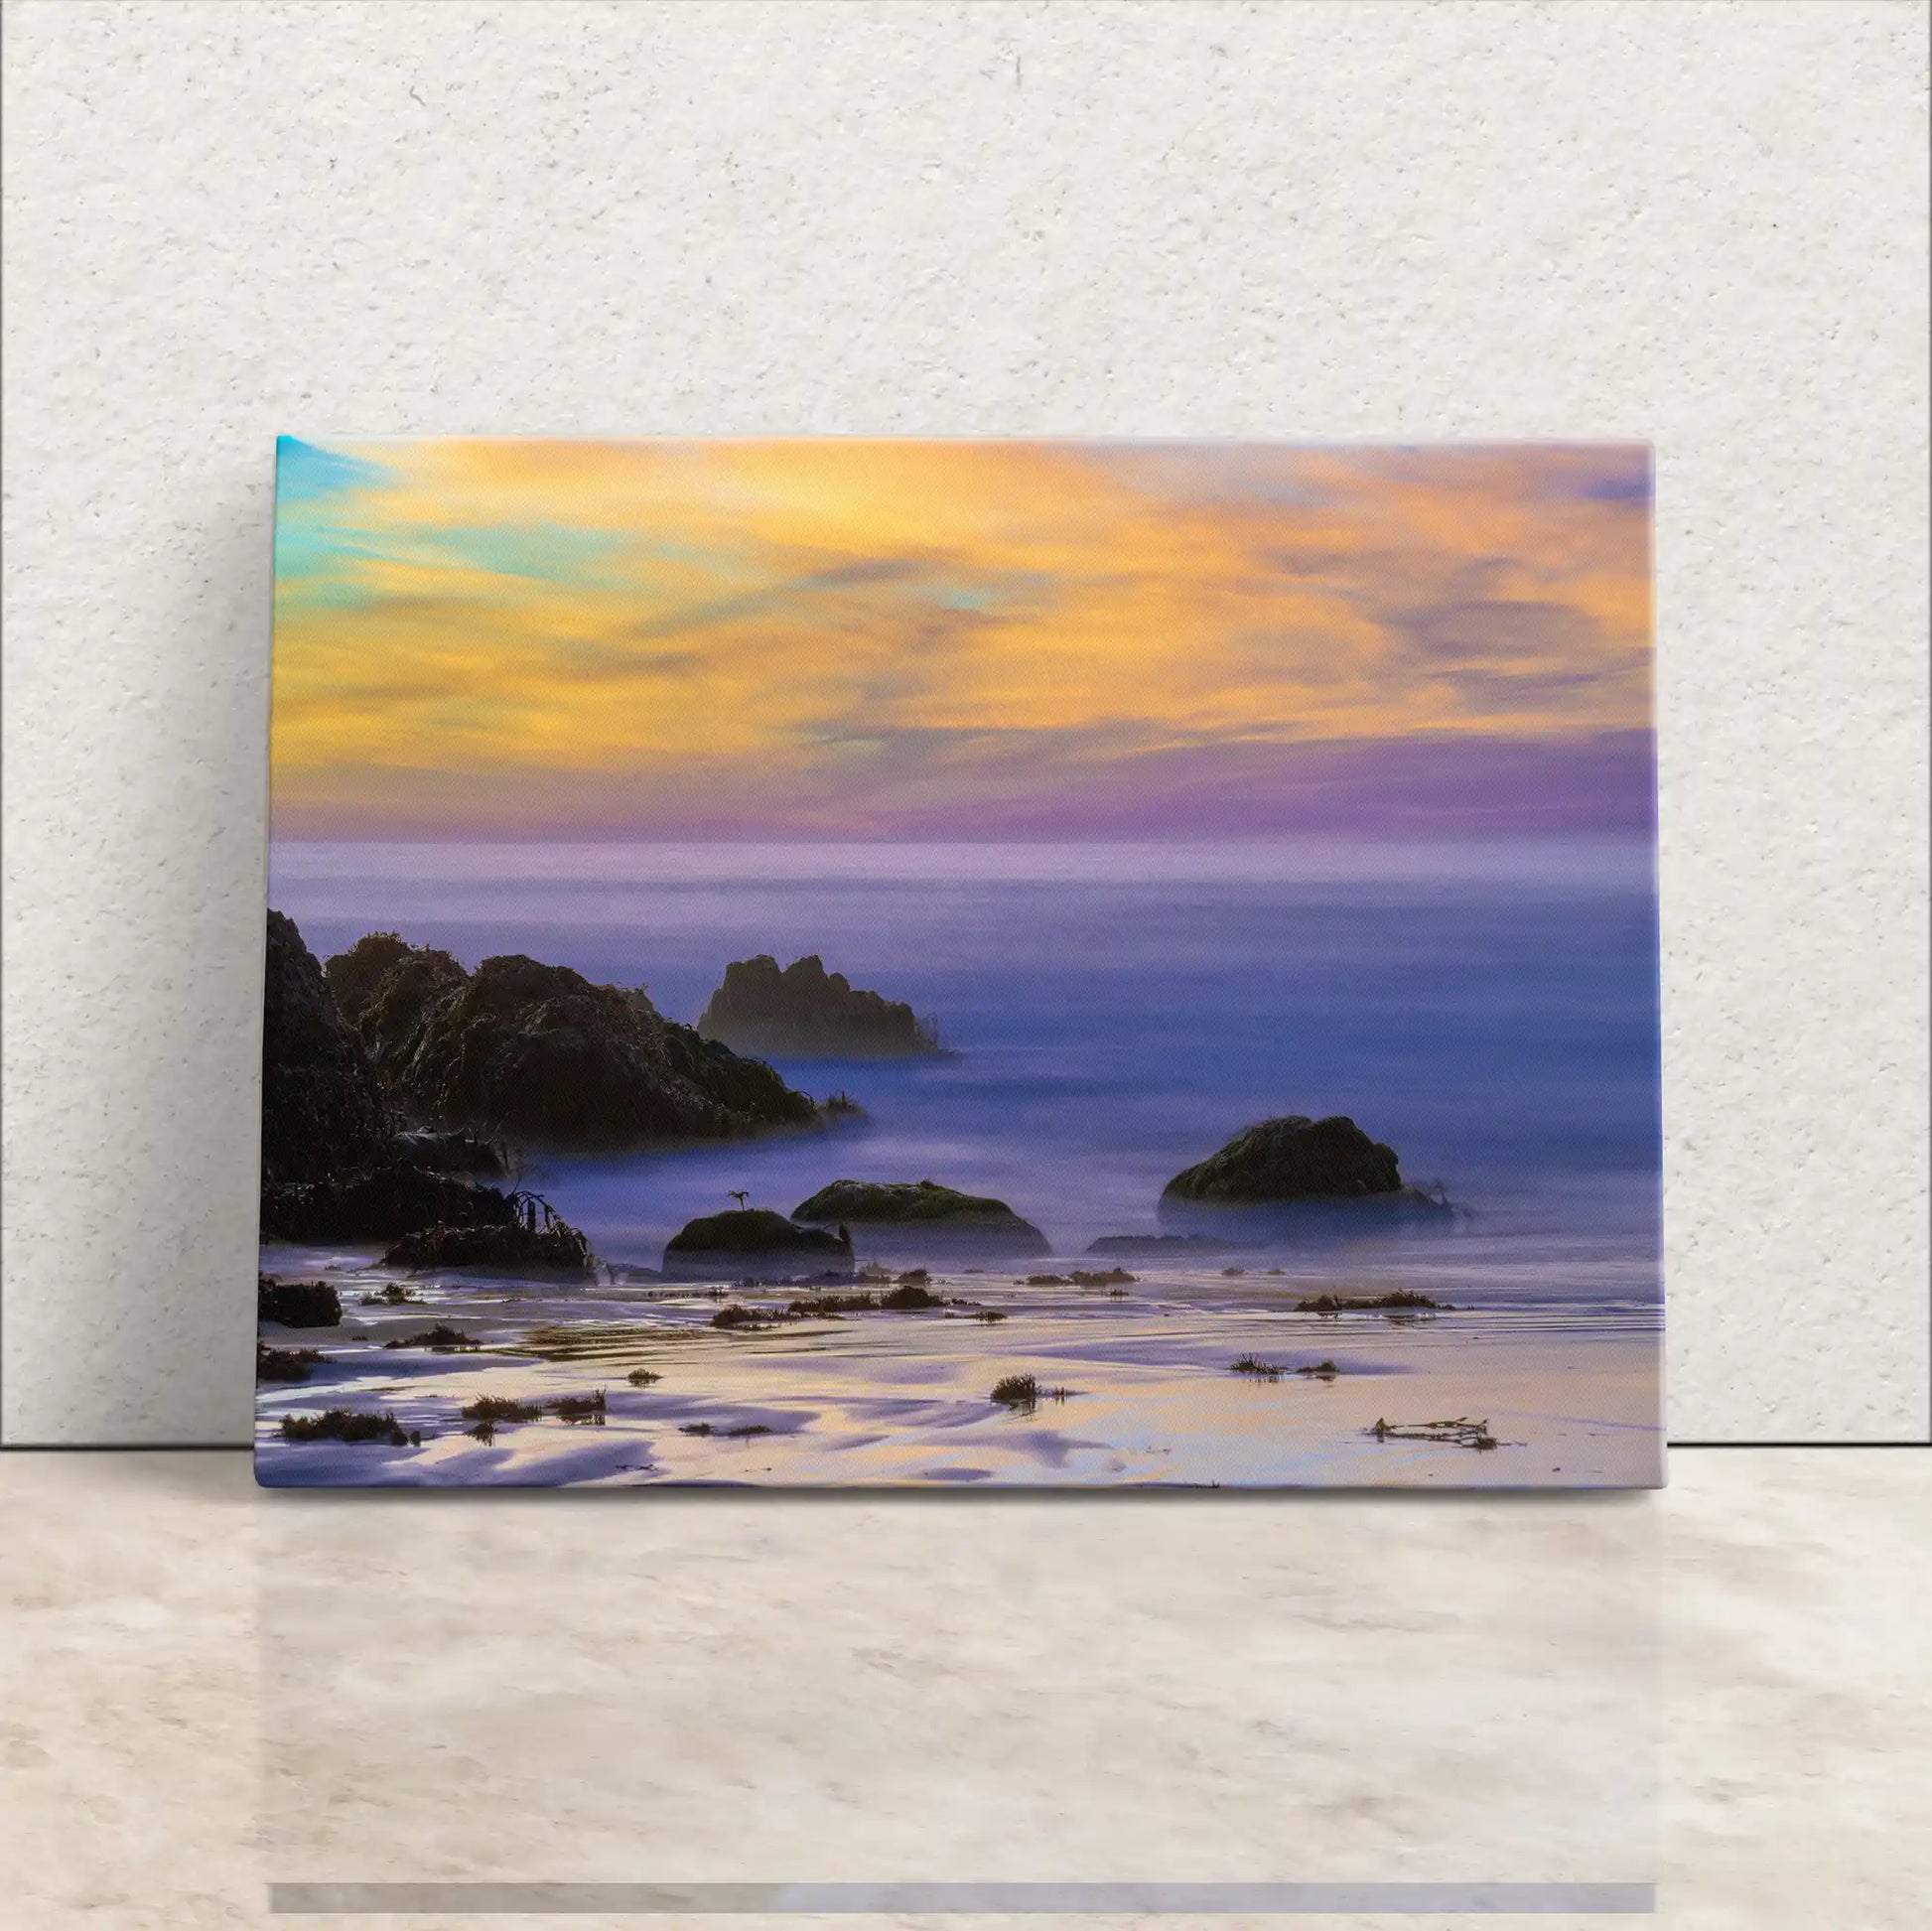 Canvas art leaning against a wall, capturing the vivid sunset over Purple Sand Beach in Big Sur, with lavender hues reflecting on the water.